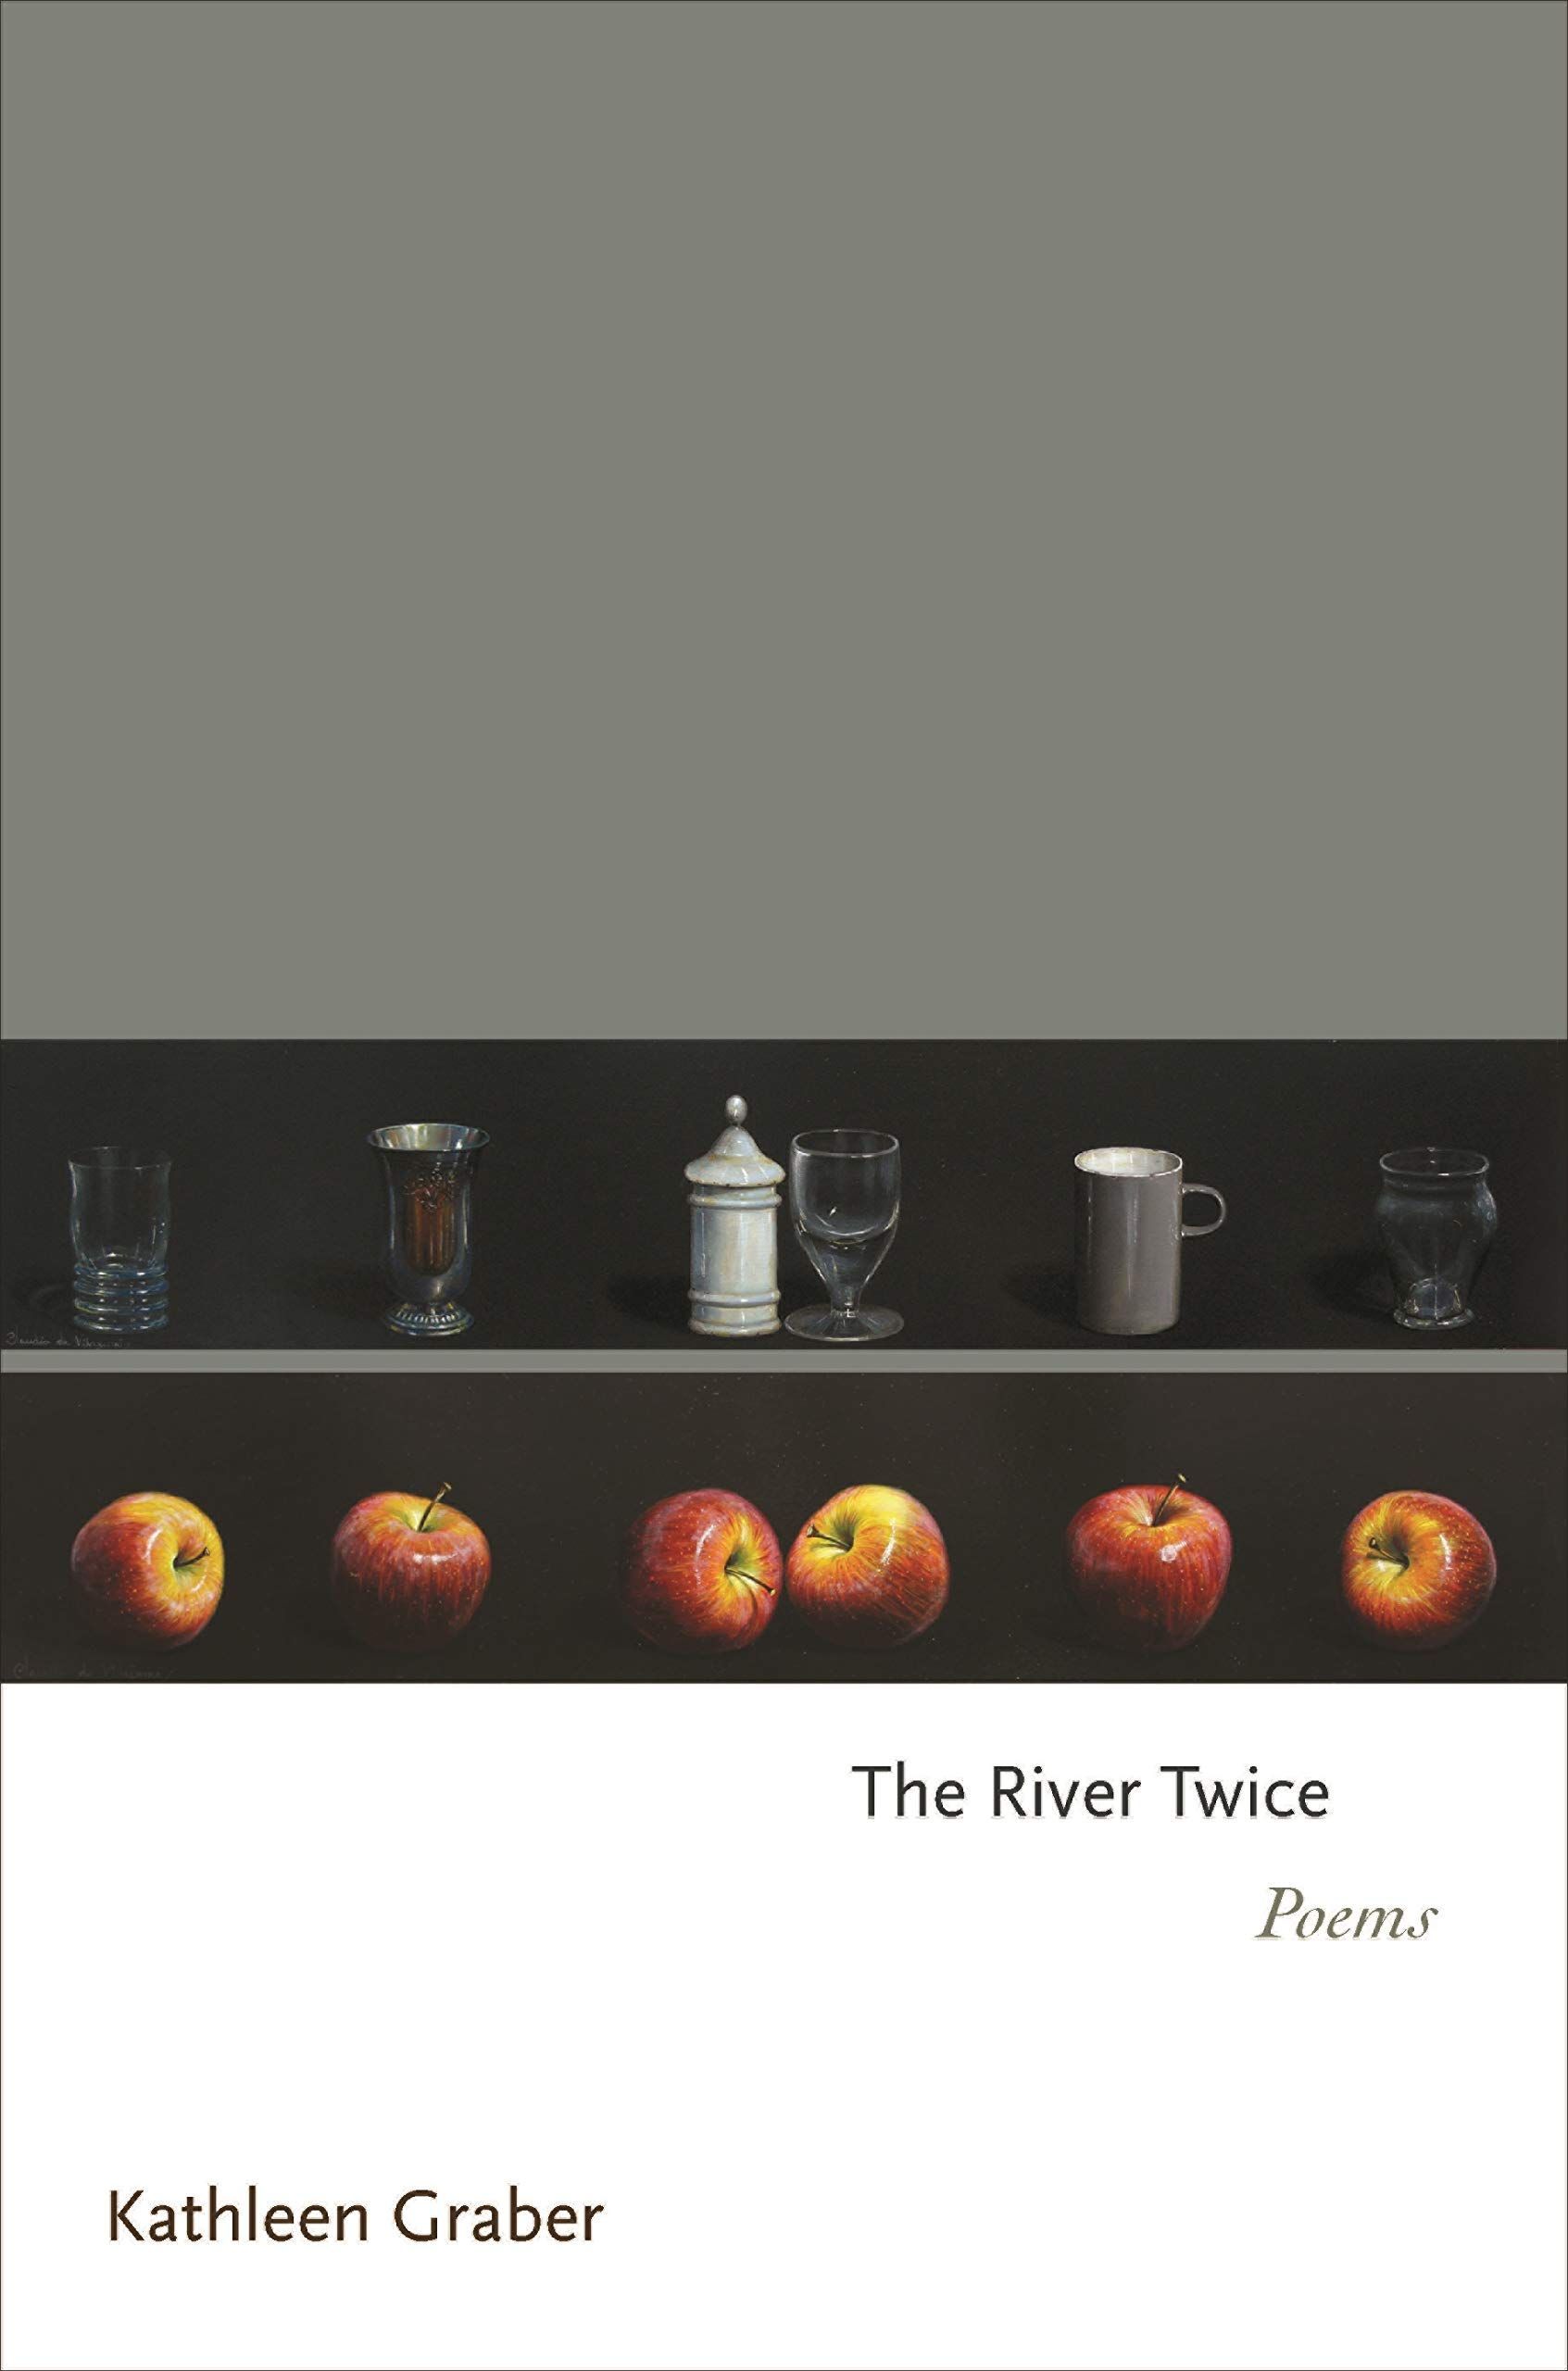 “To Say Two Things at Once”: On Kathleen Graber’s “The River Twice”